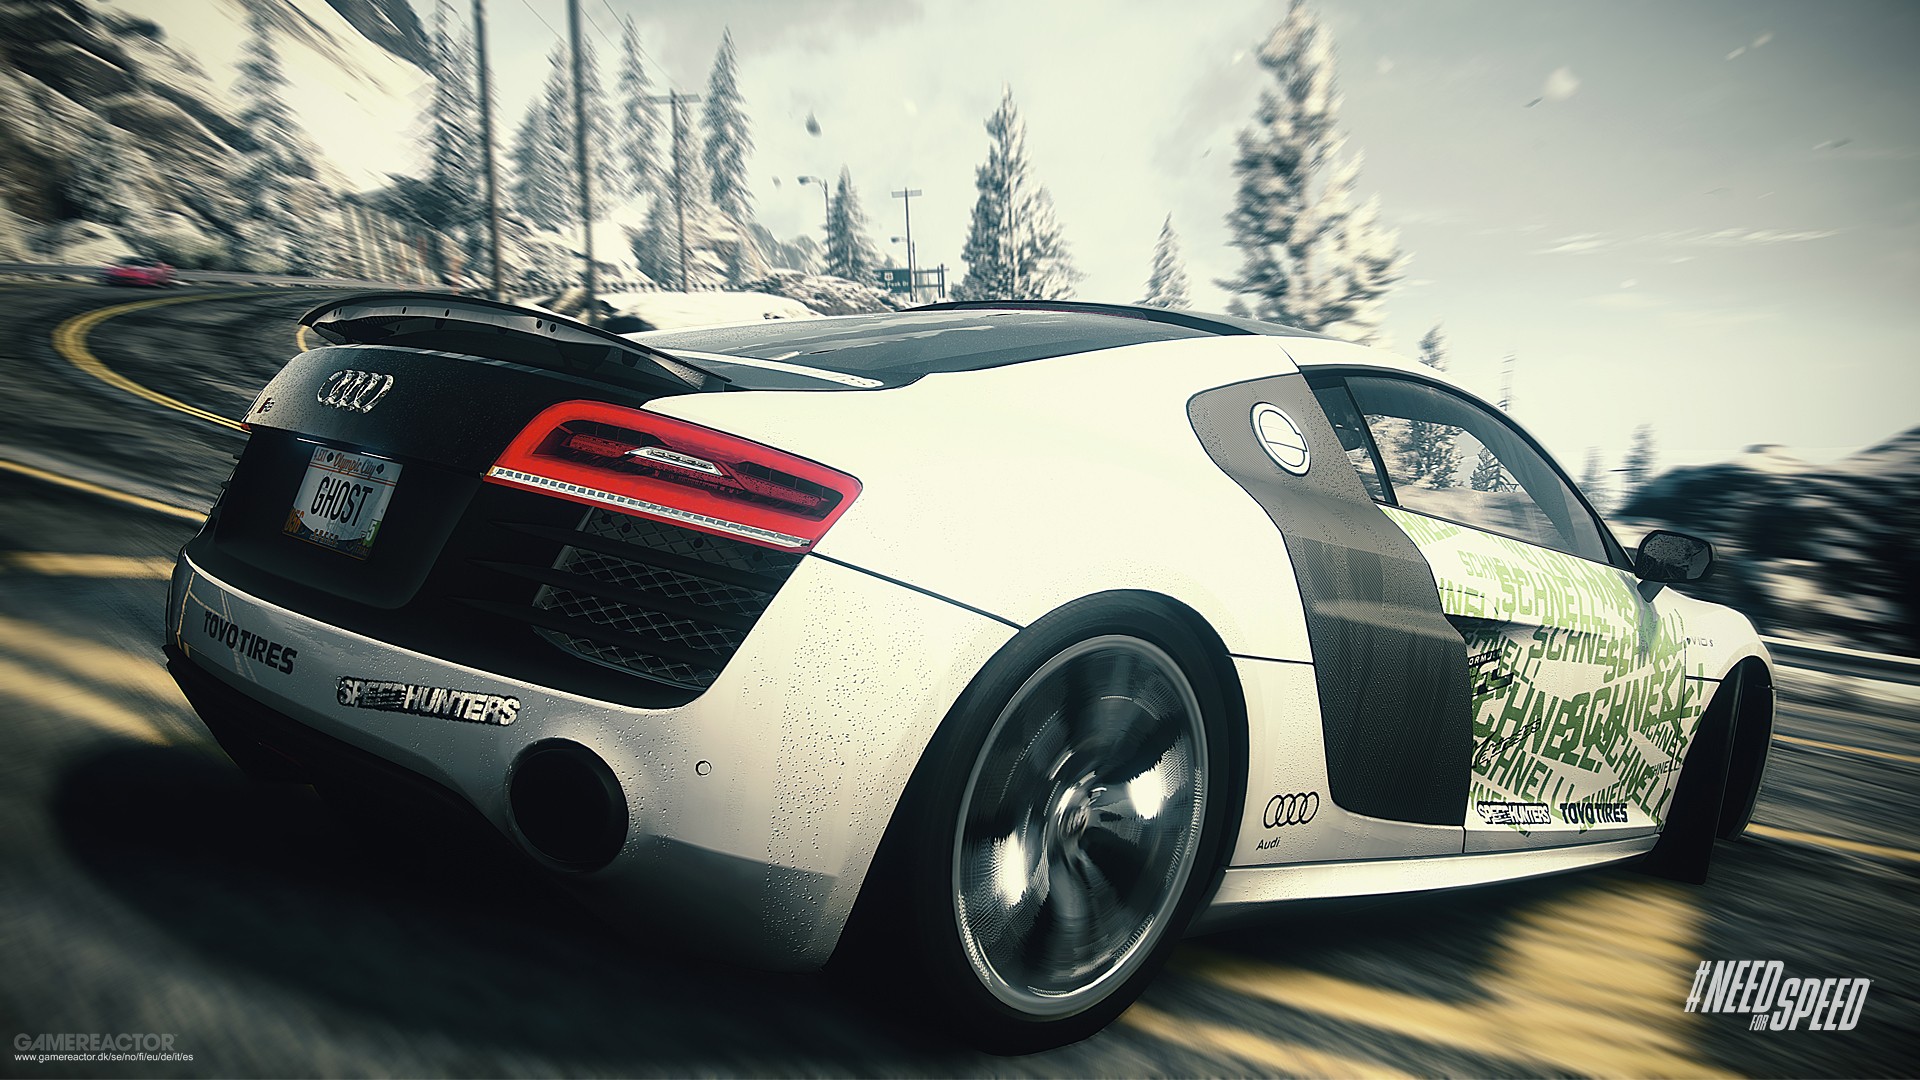 Need for Speed: Rivals system requirements